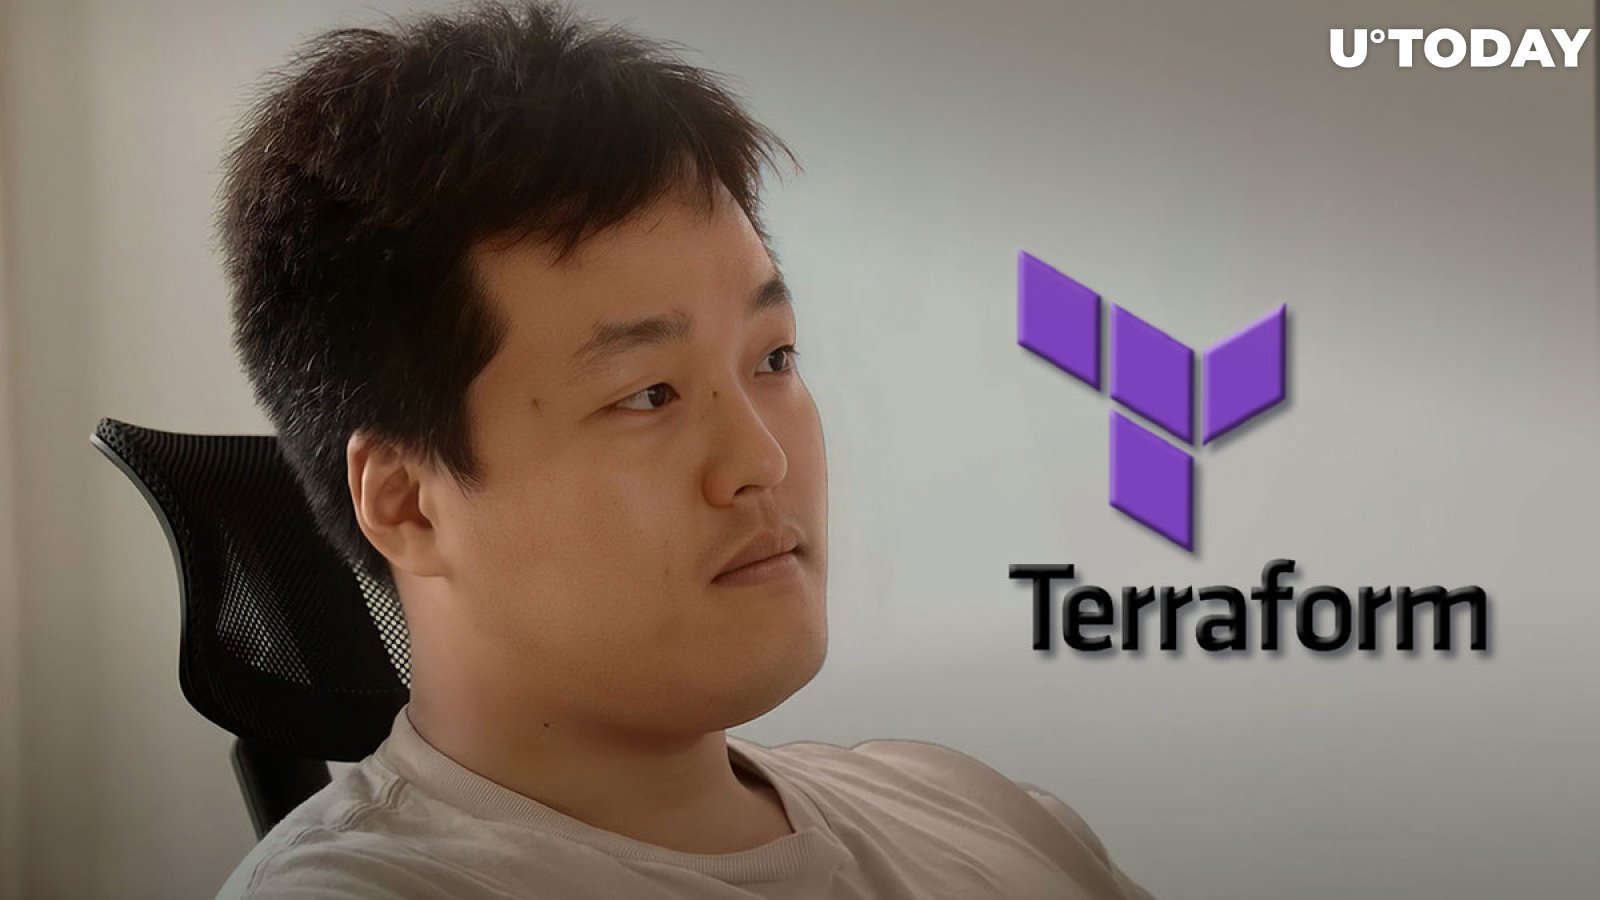 Terraform Labs Says It Will Not Give Out Do Kwon's Location